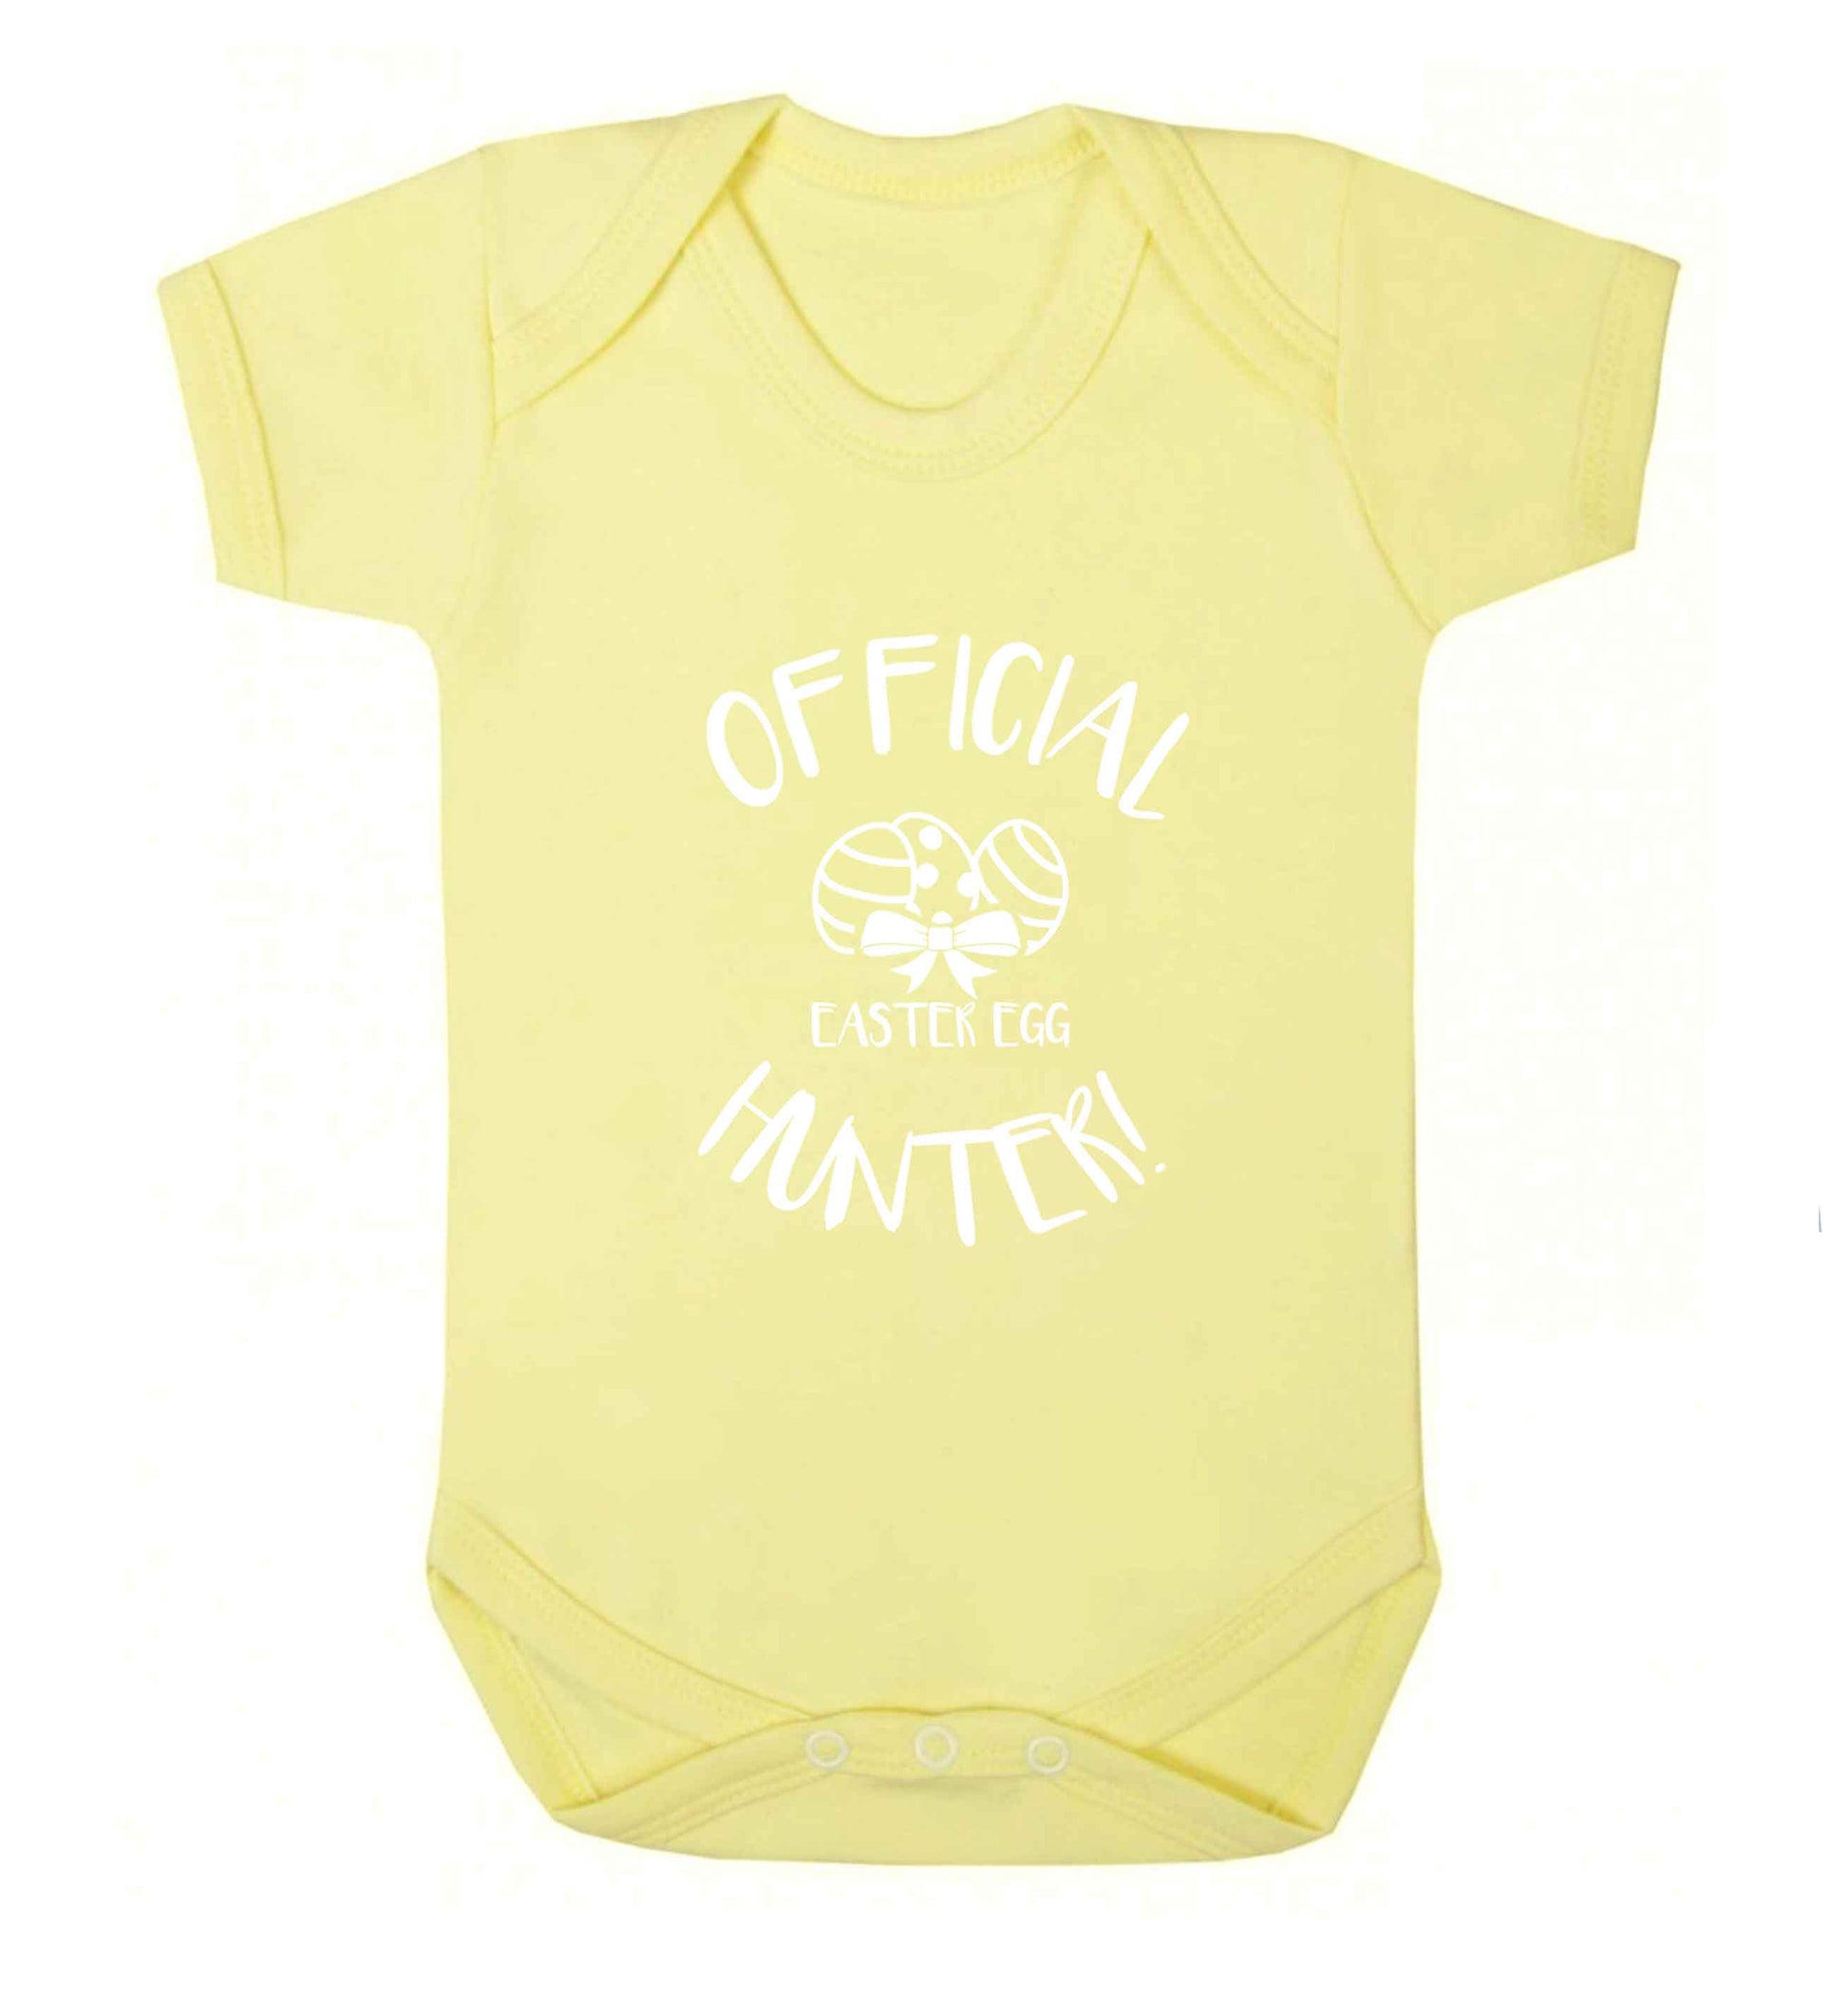 Official Easter egg hunter! baby vest pale yellow 18-24 months